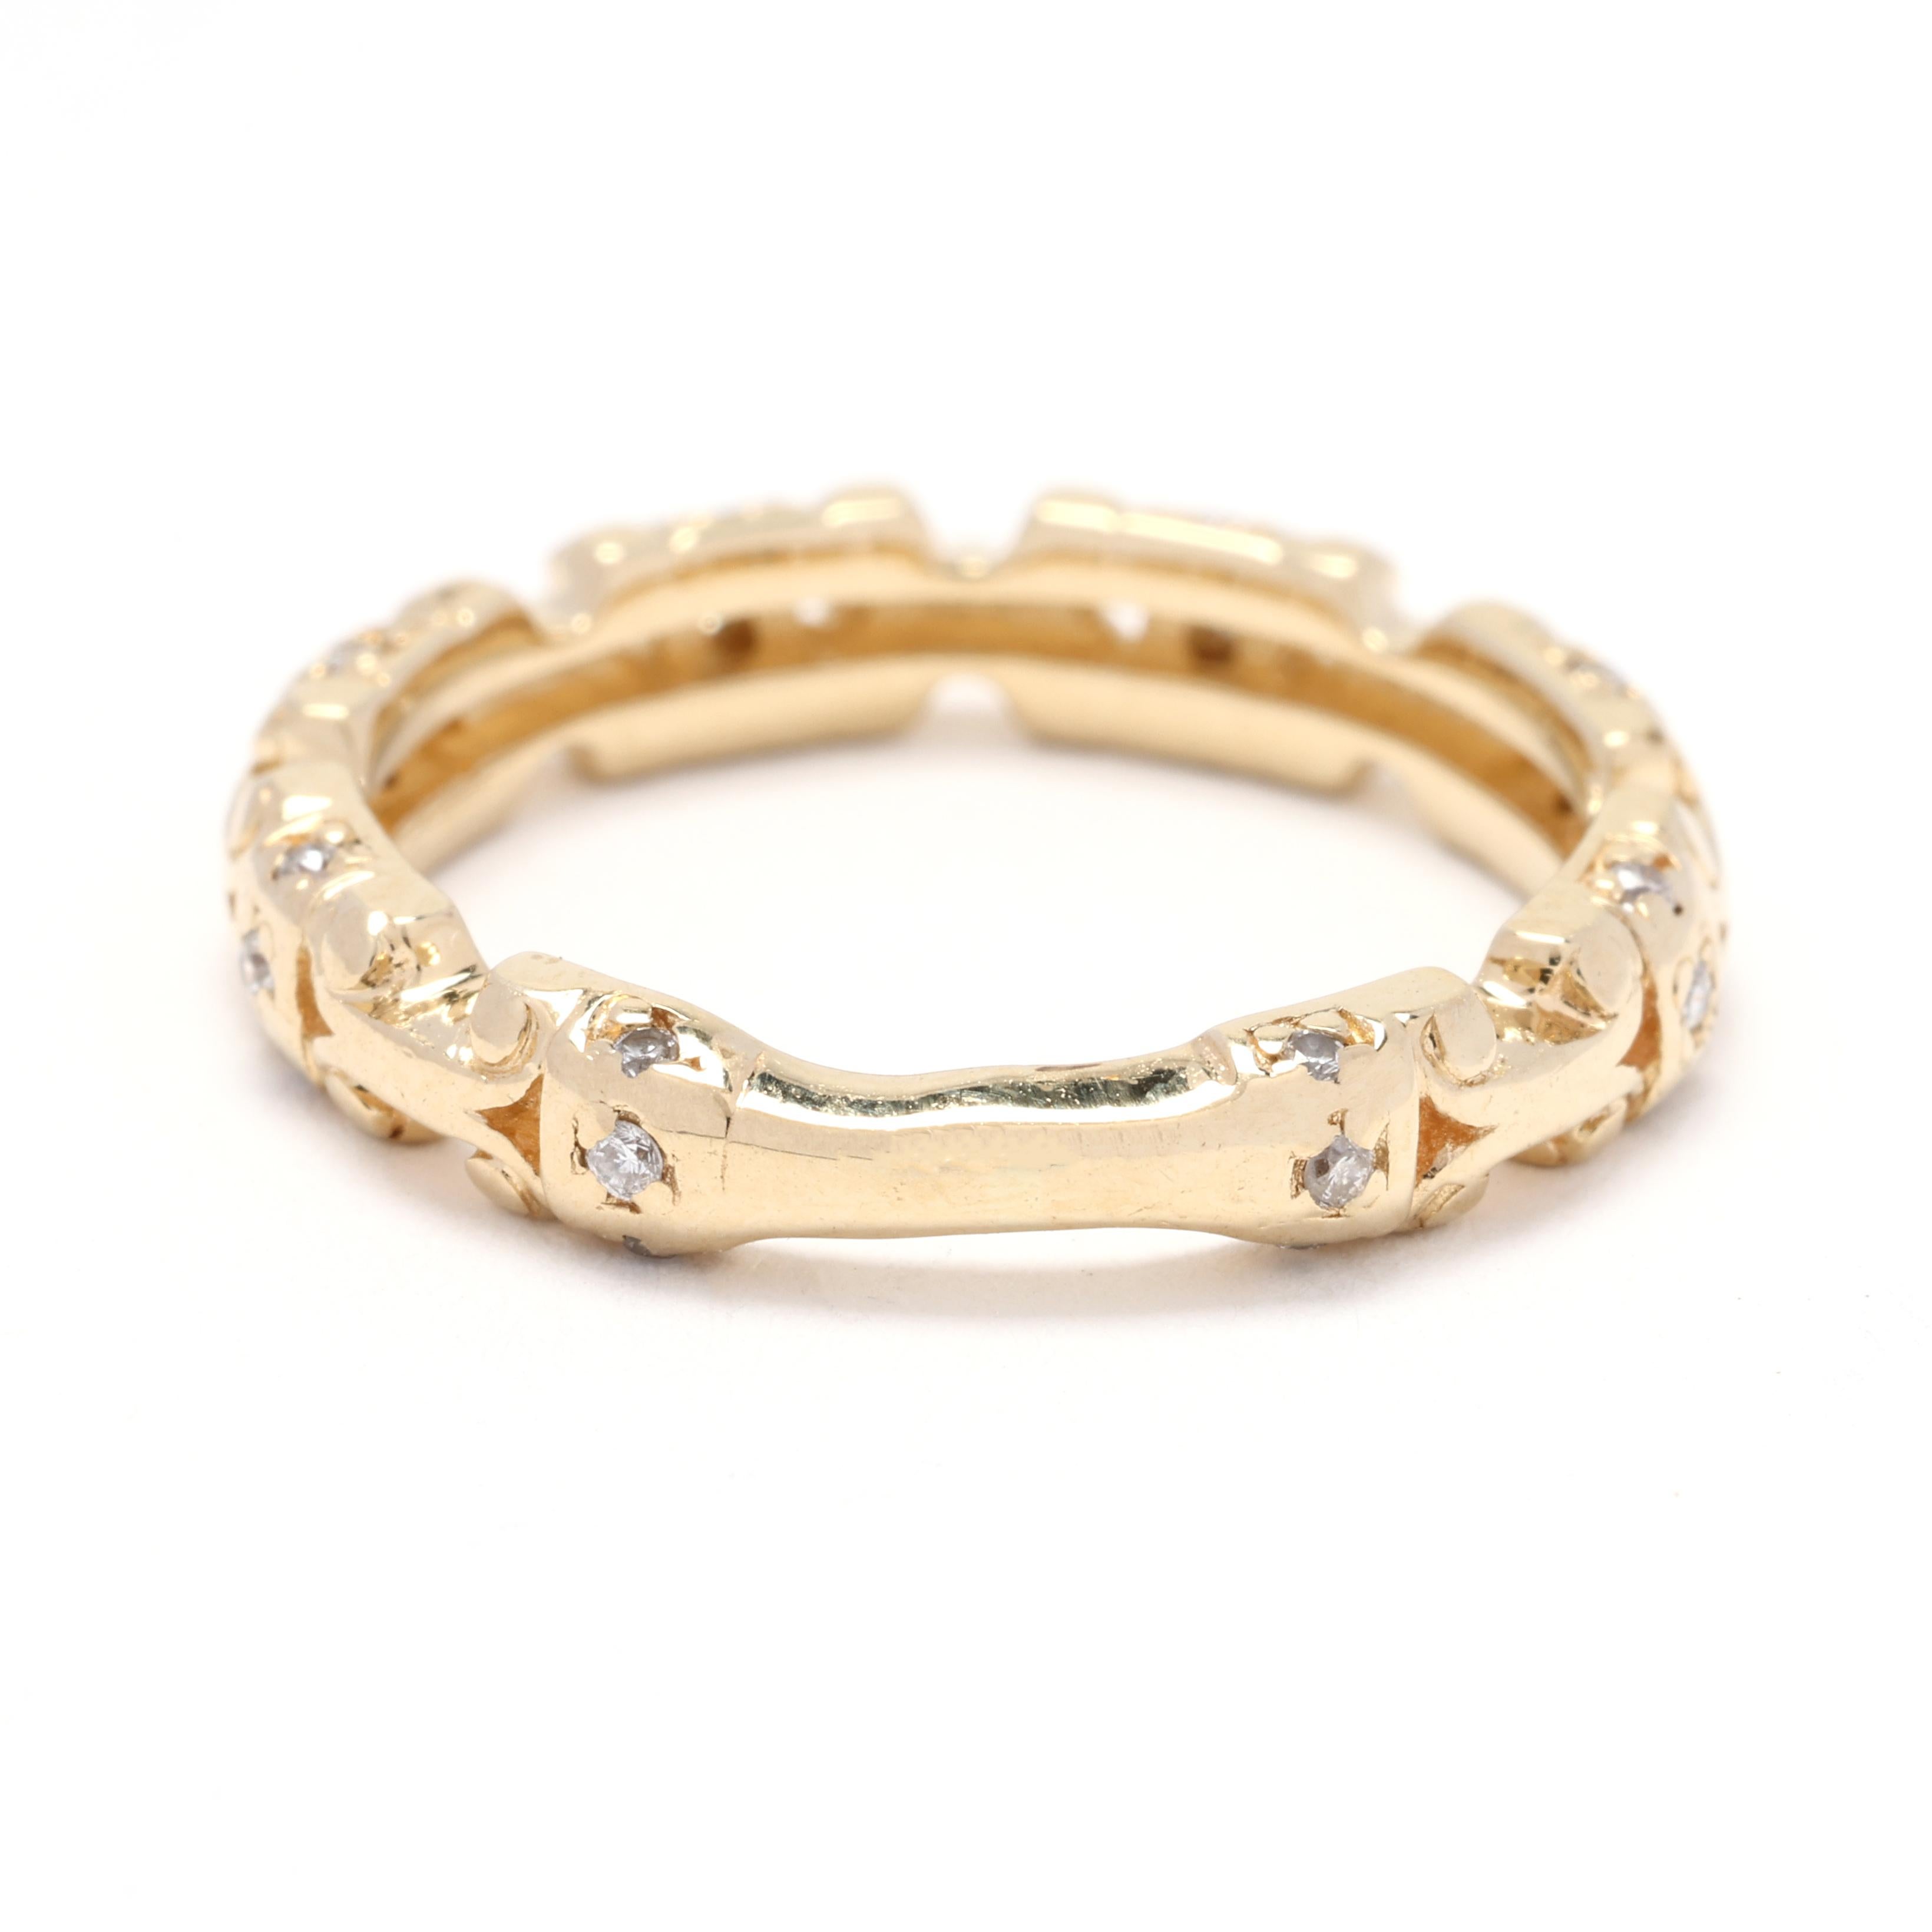 Brilliant Cut 0.12ctw Diamond Patterned Band, 14k Yellow Gold, Ring Size 4.5 For Sale